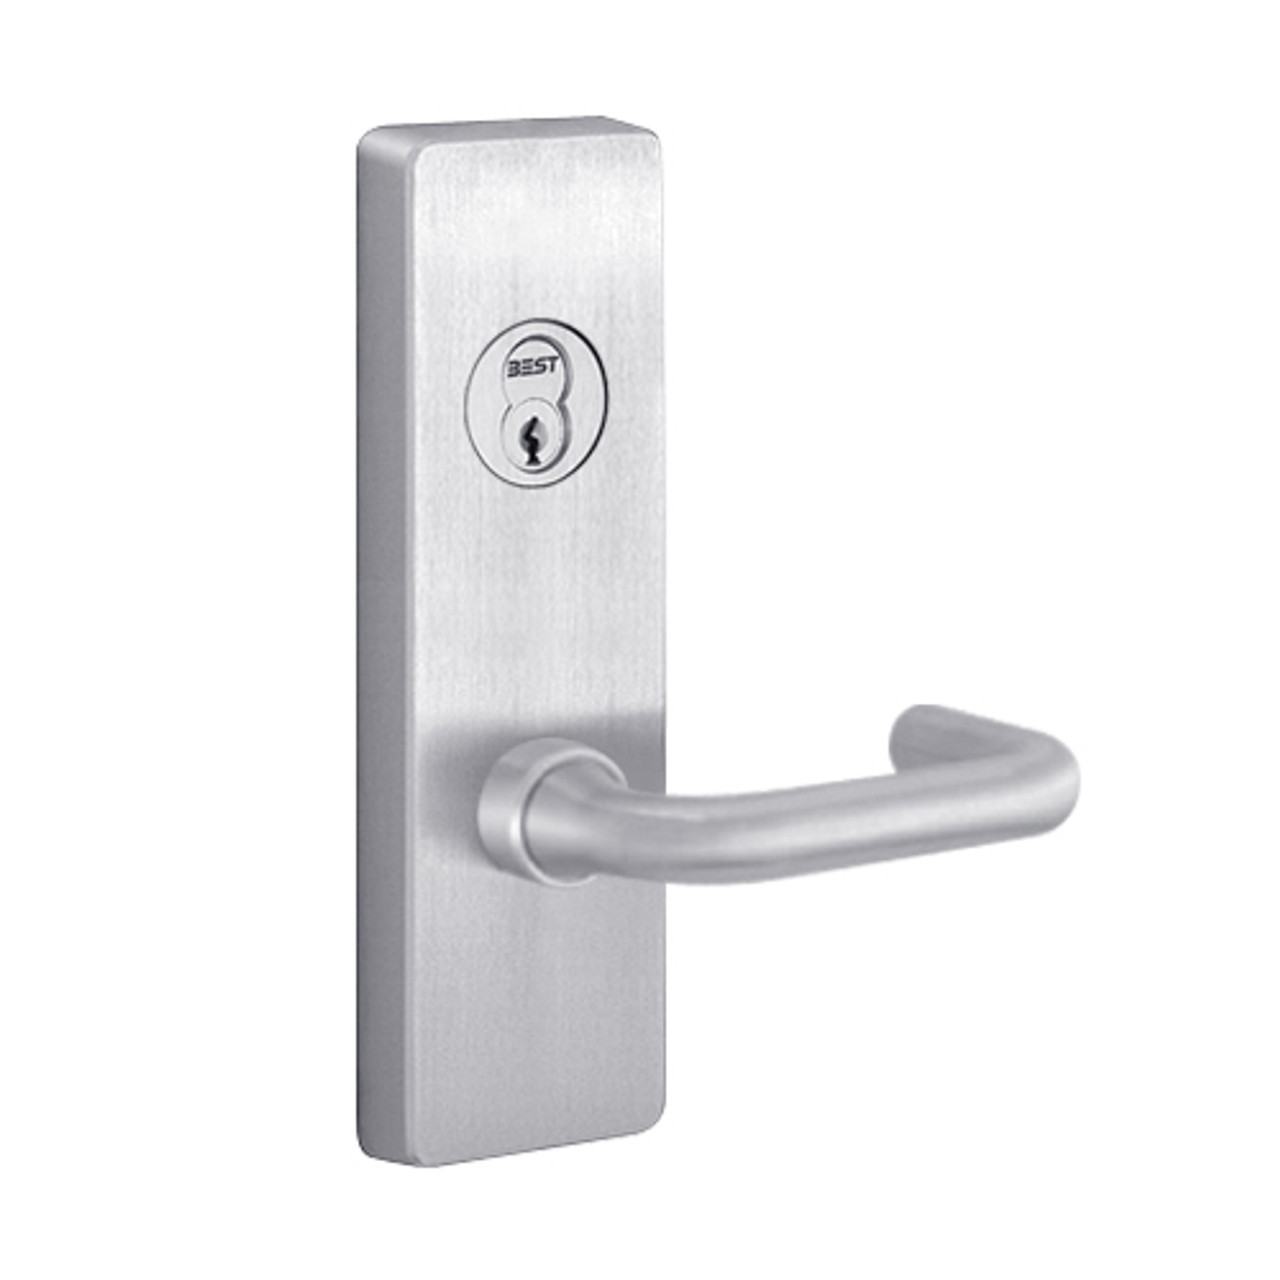 4903C-625-LHR PHI Key Retracts Latchbolt Trim with C Lever Design for Apex and Olympian Series Exit Device in Bright Chrome Finish